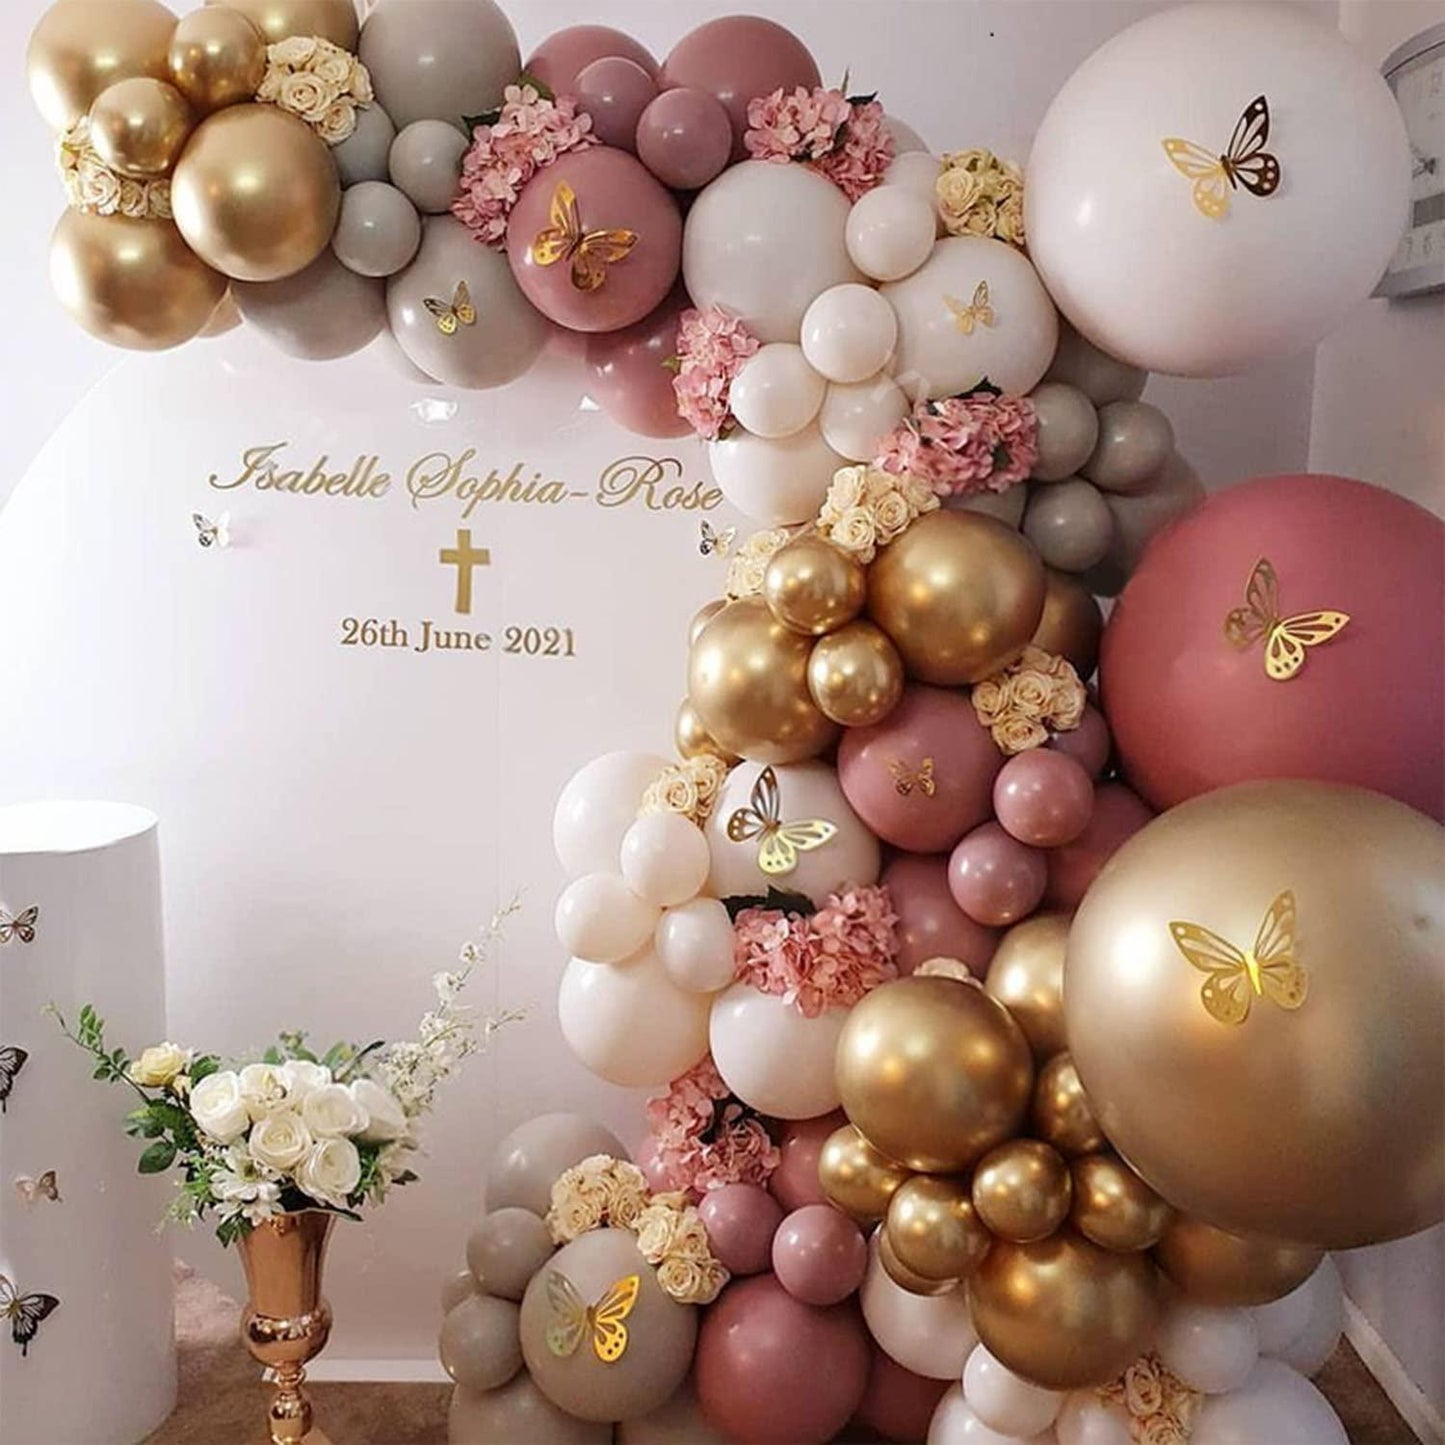 148PCS Rose and Pink Balloon Garland Arch Kit, Gold Chrome balloons Latex Balloons Rose Gold Butterfly Stickers Wall Decor - If you say i do